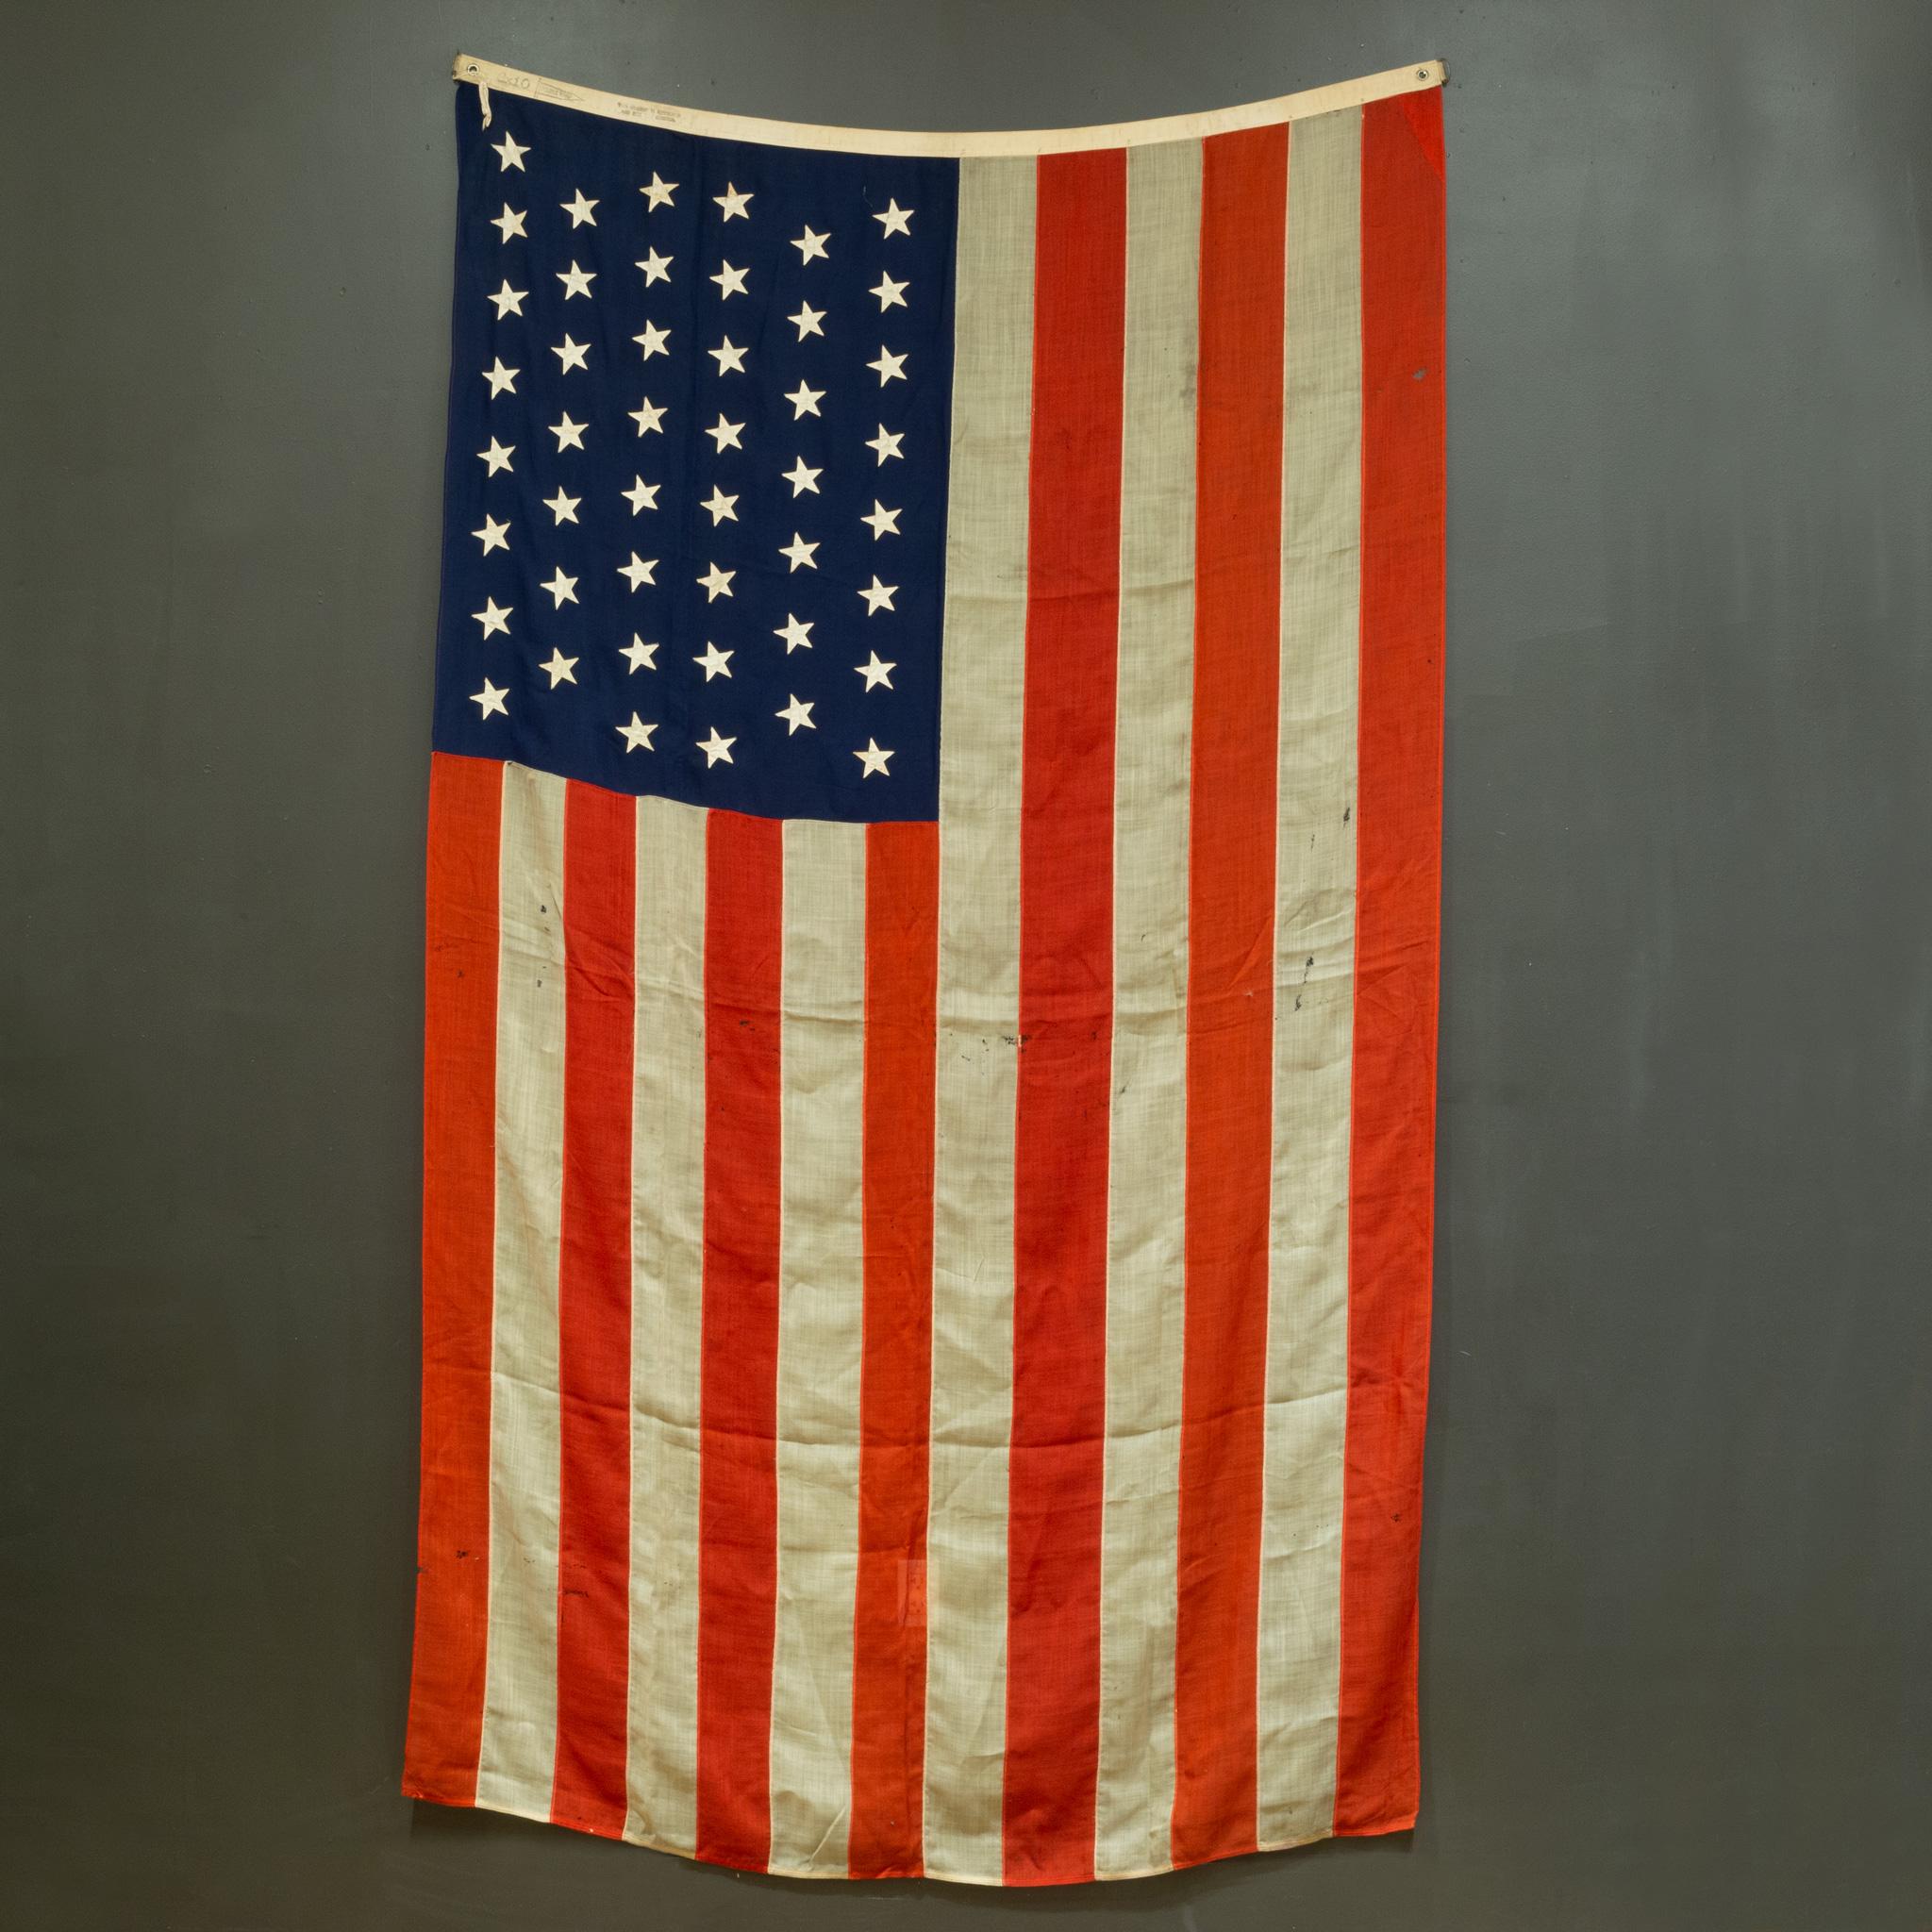 how many stars were on the american flag in 1940